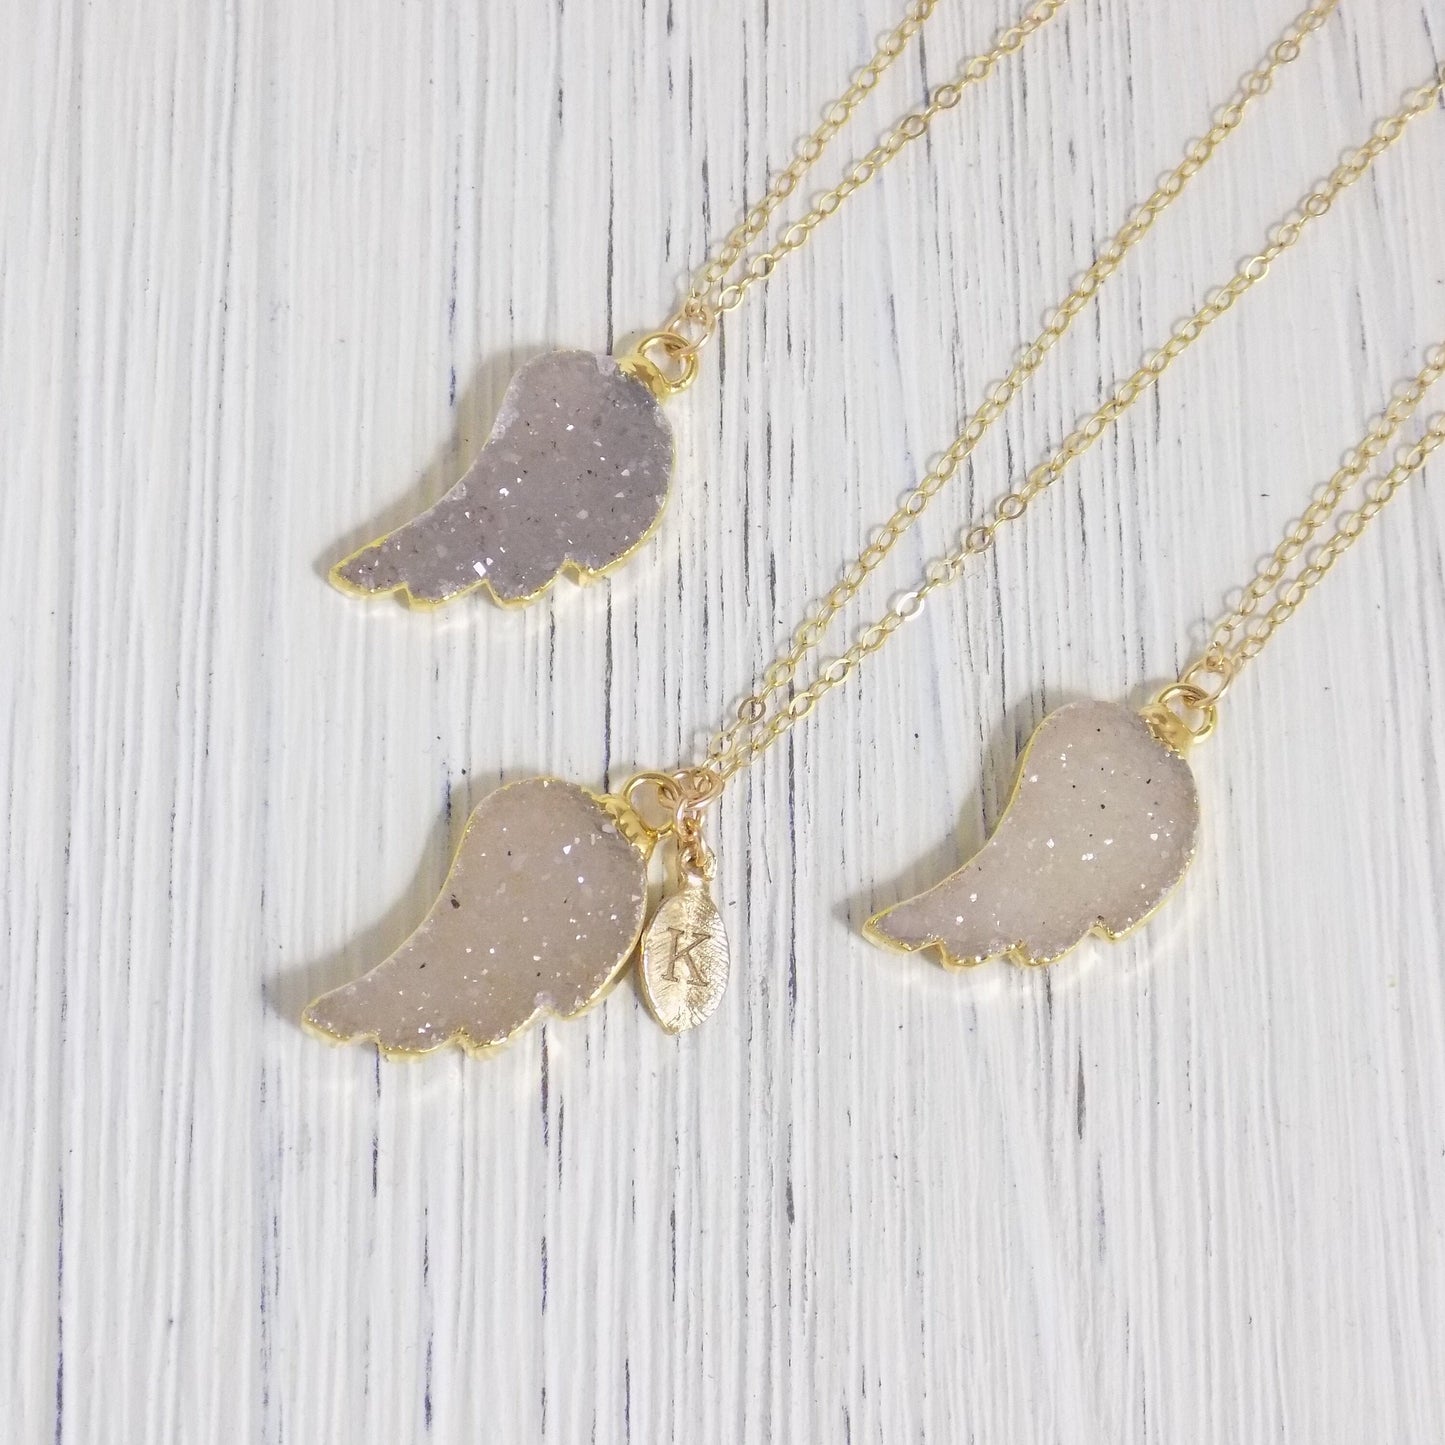 Angel Wing Necklace Gold Fill Chain - Drusy Necklace Druzy